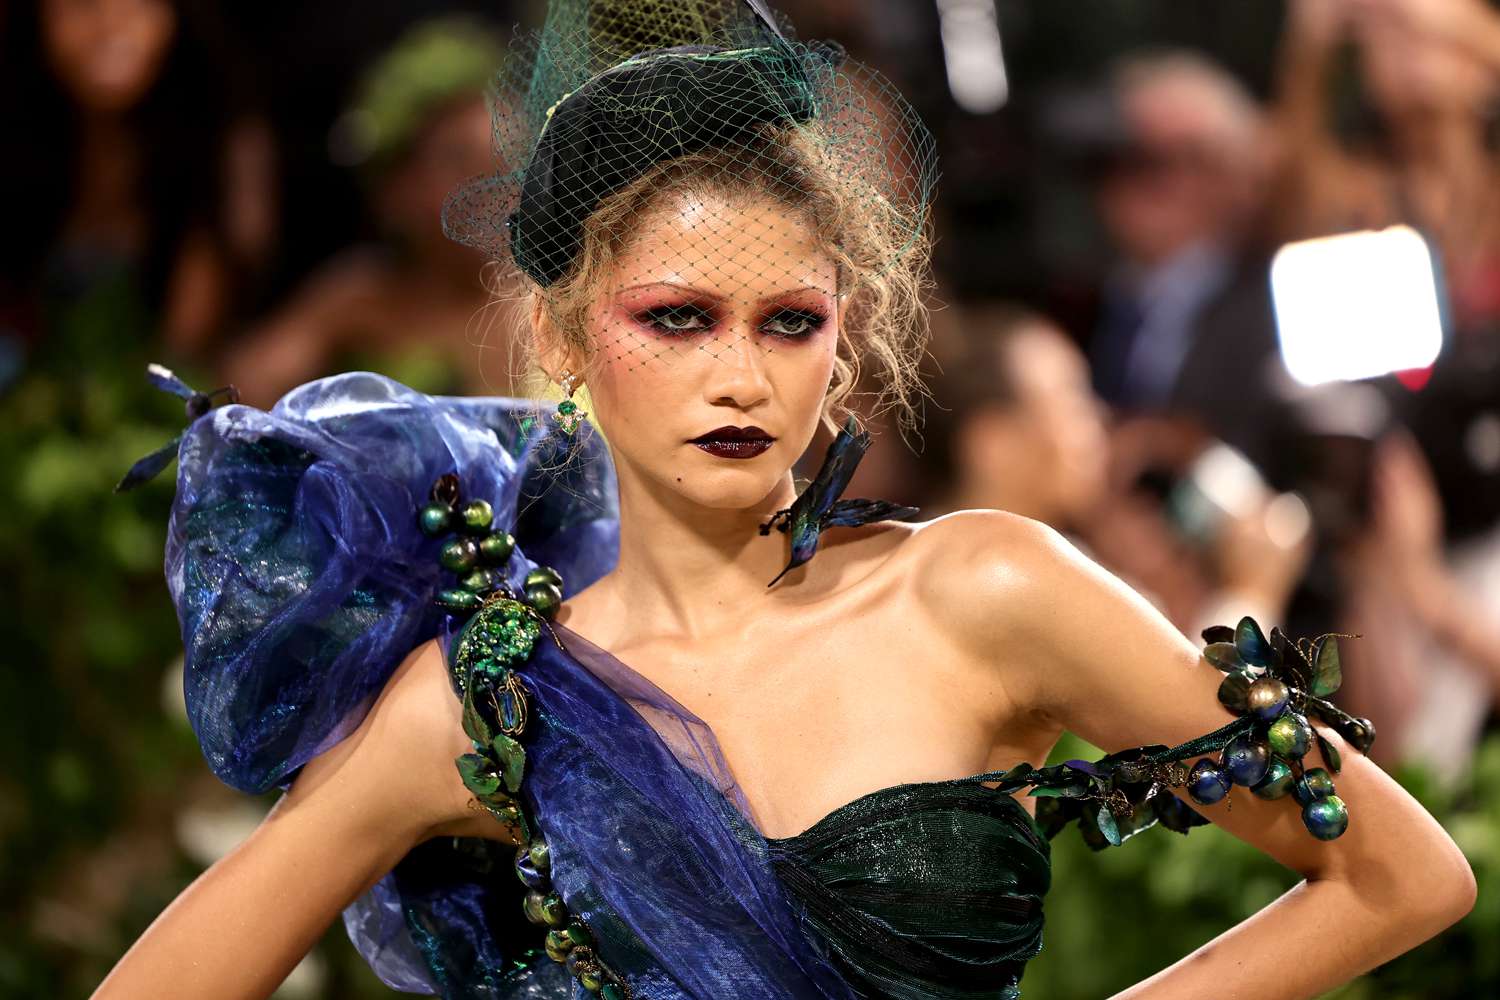 Zendaya Takes Flight at Met Gala in Peacock-Inspired Gown (and Her Most Dramatic Makeup Look Yet!)